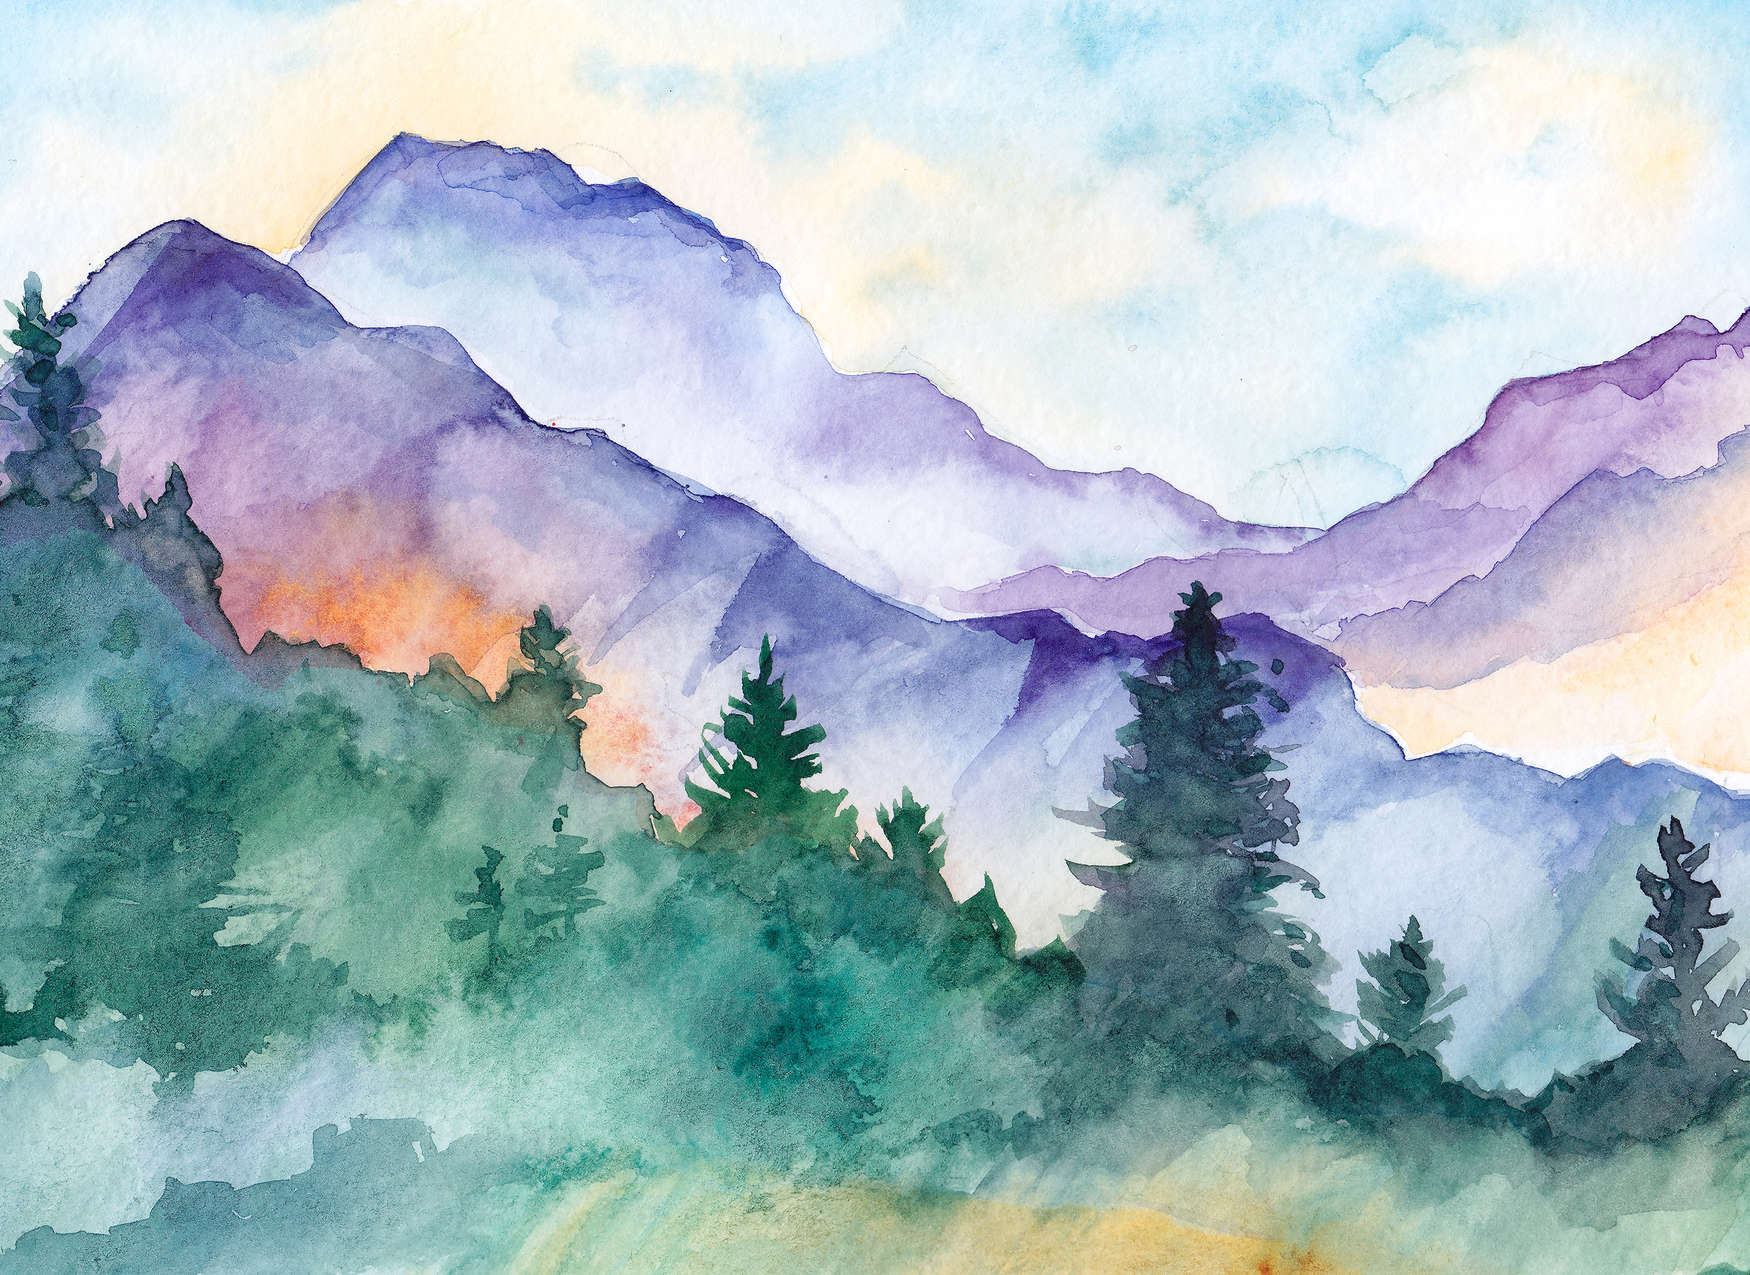             Watercolour Painted Mountain Landscape Wall Mural - Colourful
        